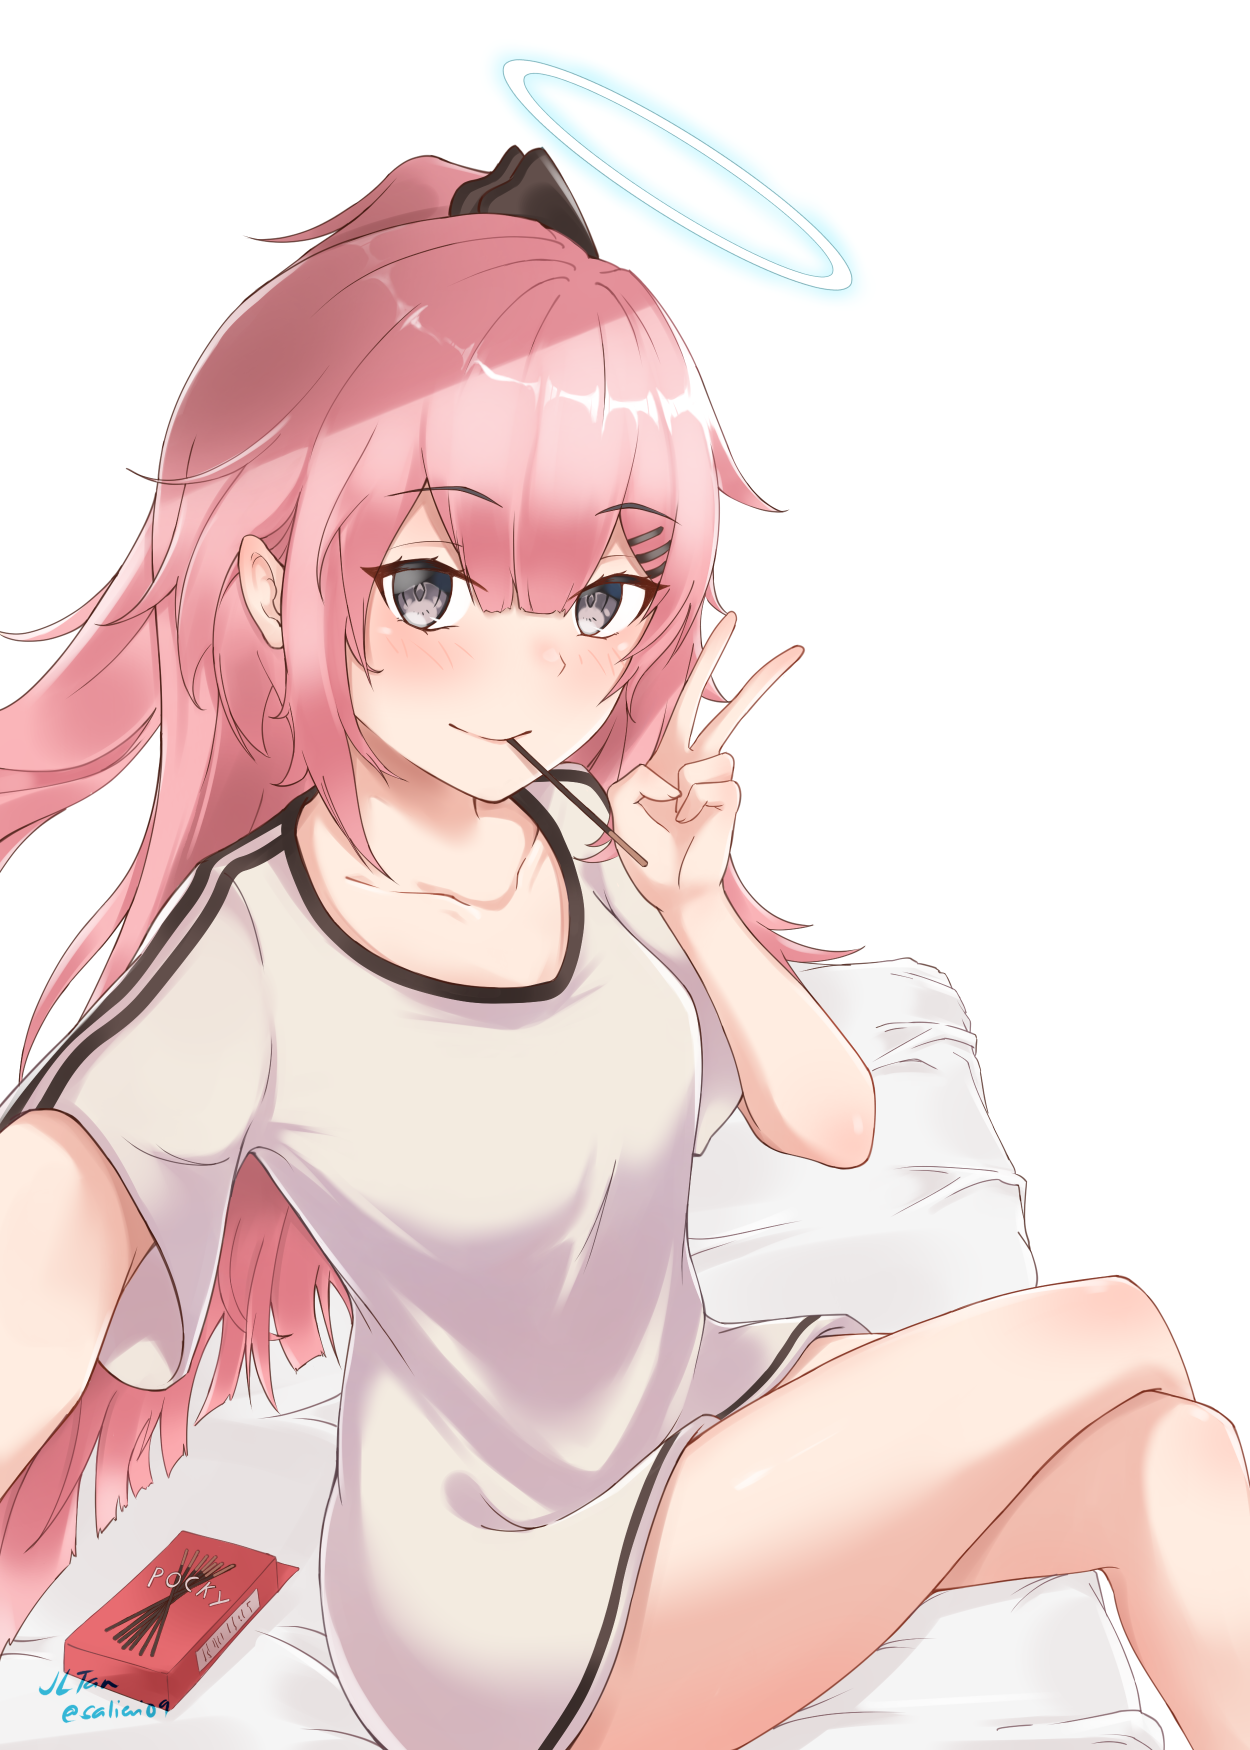 Anime 1250x1750 anime girls Arknights Ambriel (Arknights) pink hair smiling Jl Tan long shirt T-shirt gray eyes Pocky selfies peace sign hand gesture looking at viewer legs